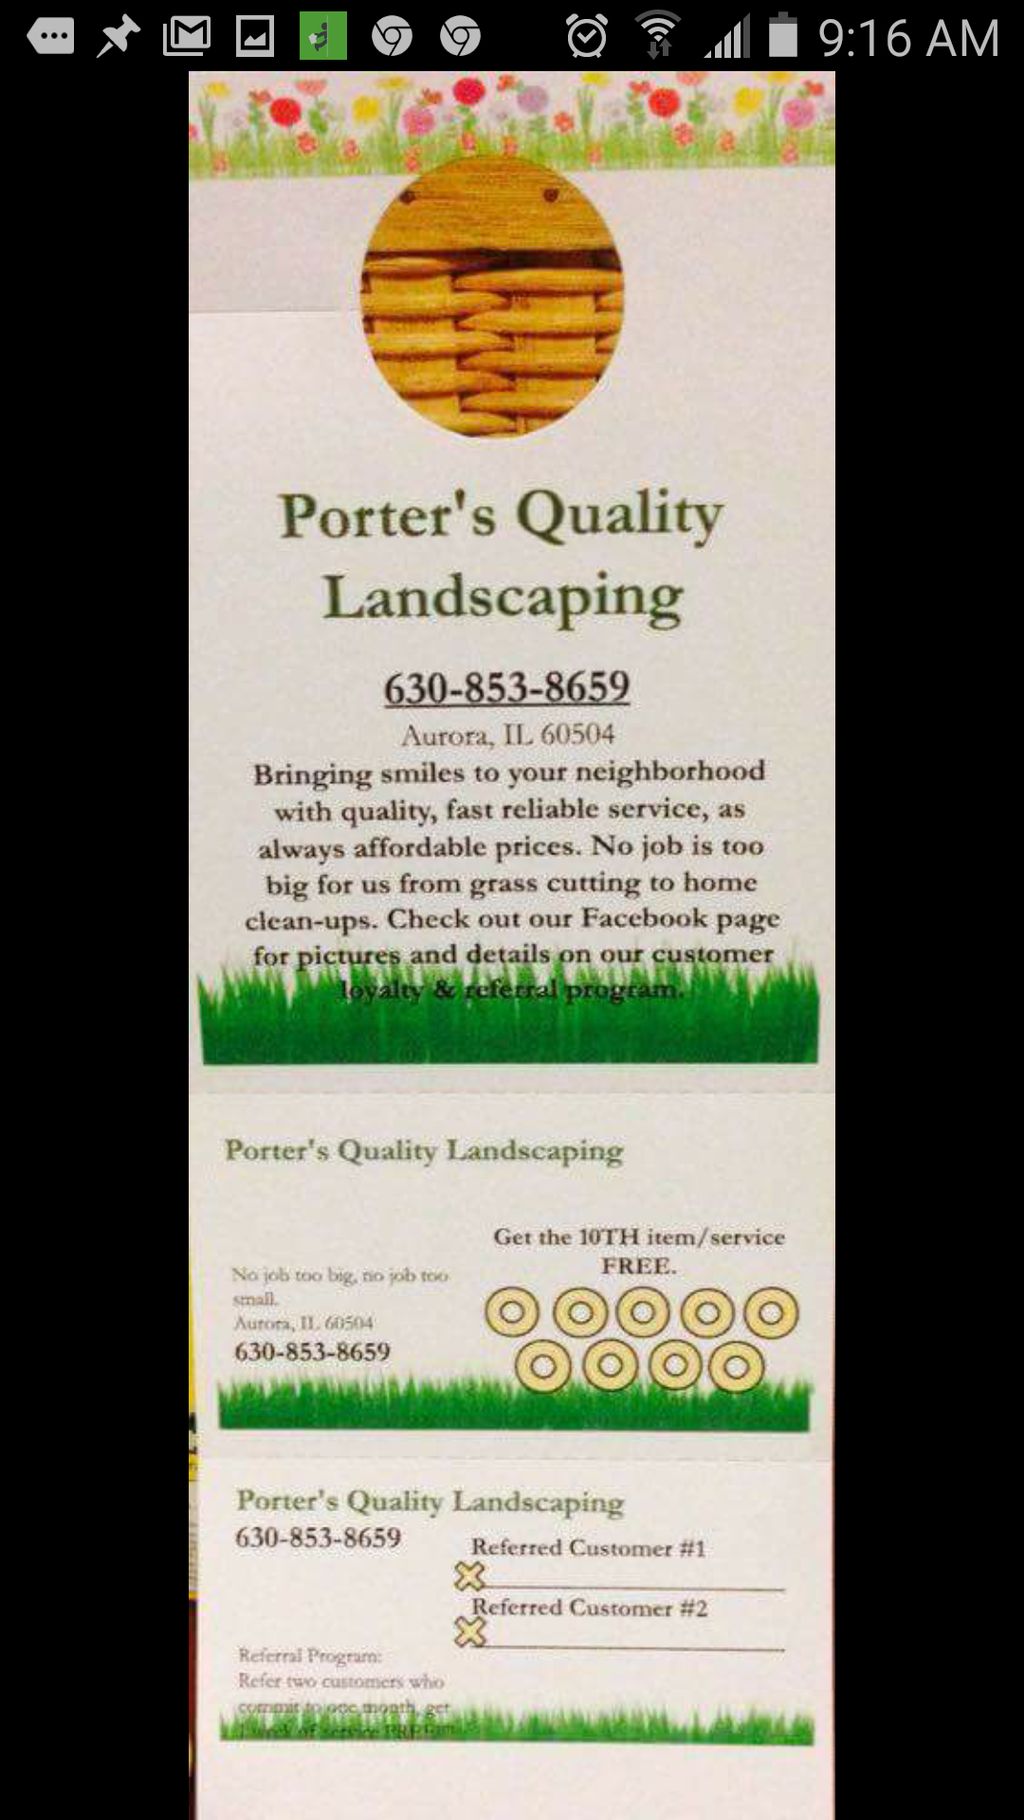 Porter's Quality Landscaping